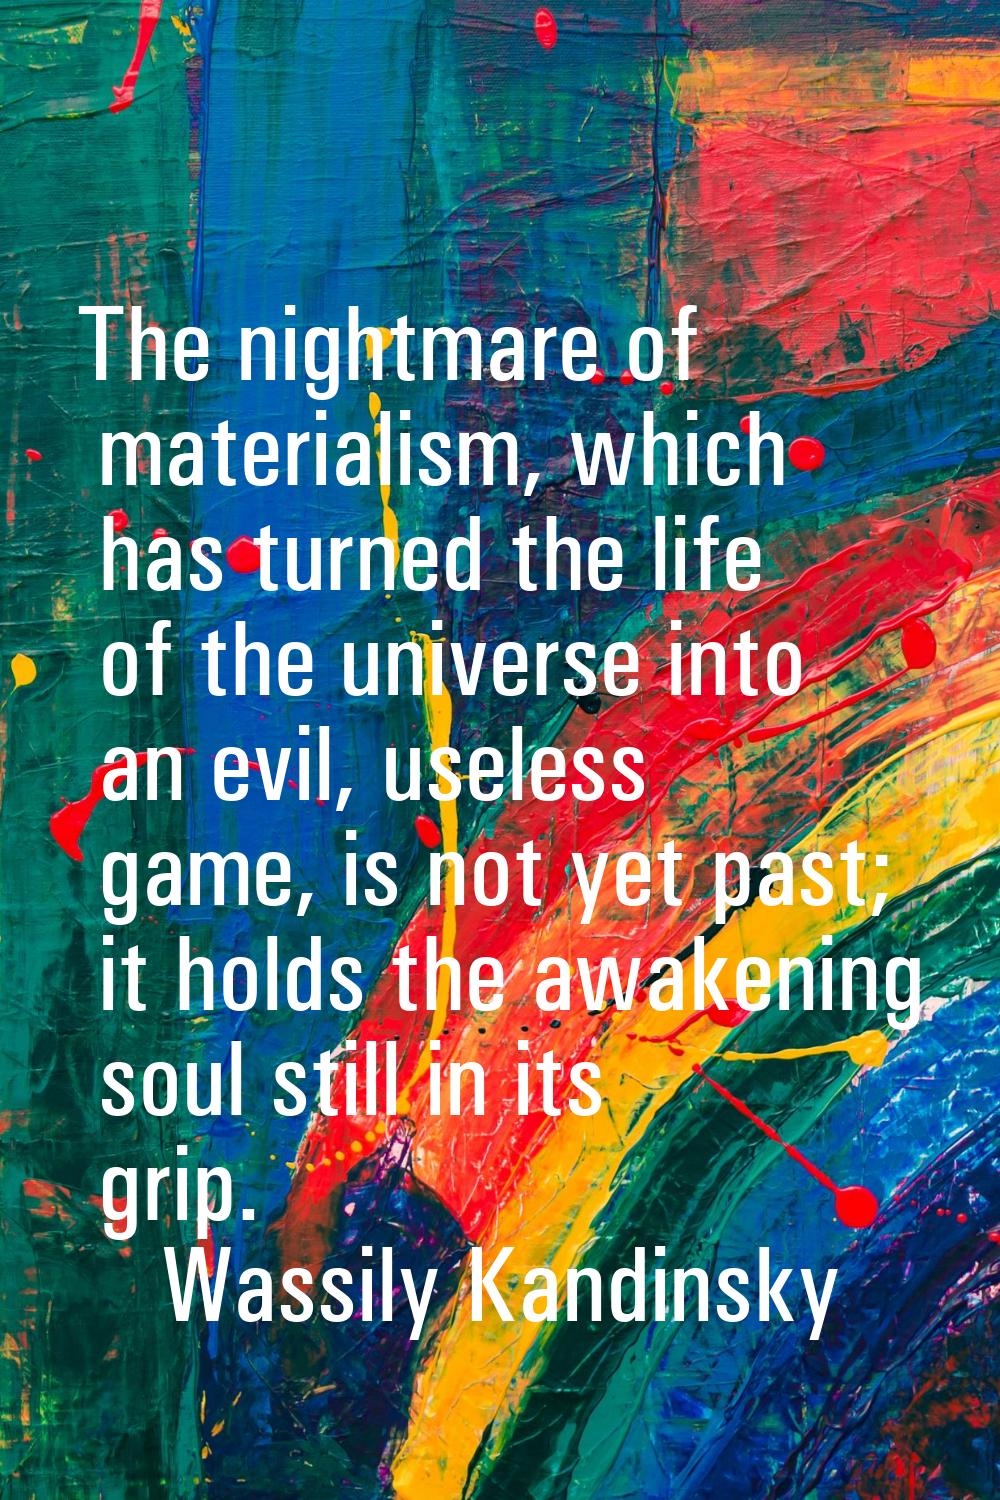 The nightmare of materialism, which has turned the life of the universe into an evil, useless game,